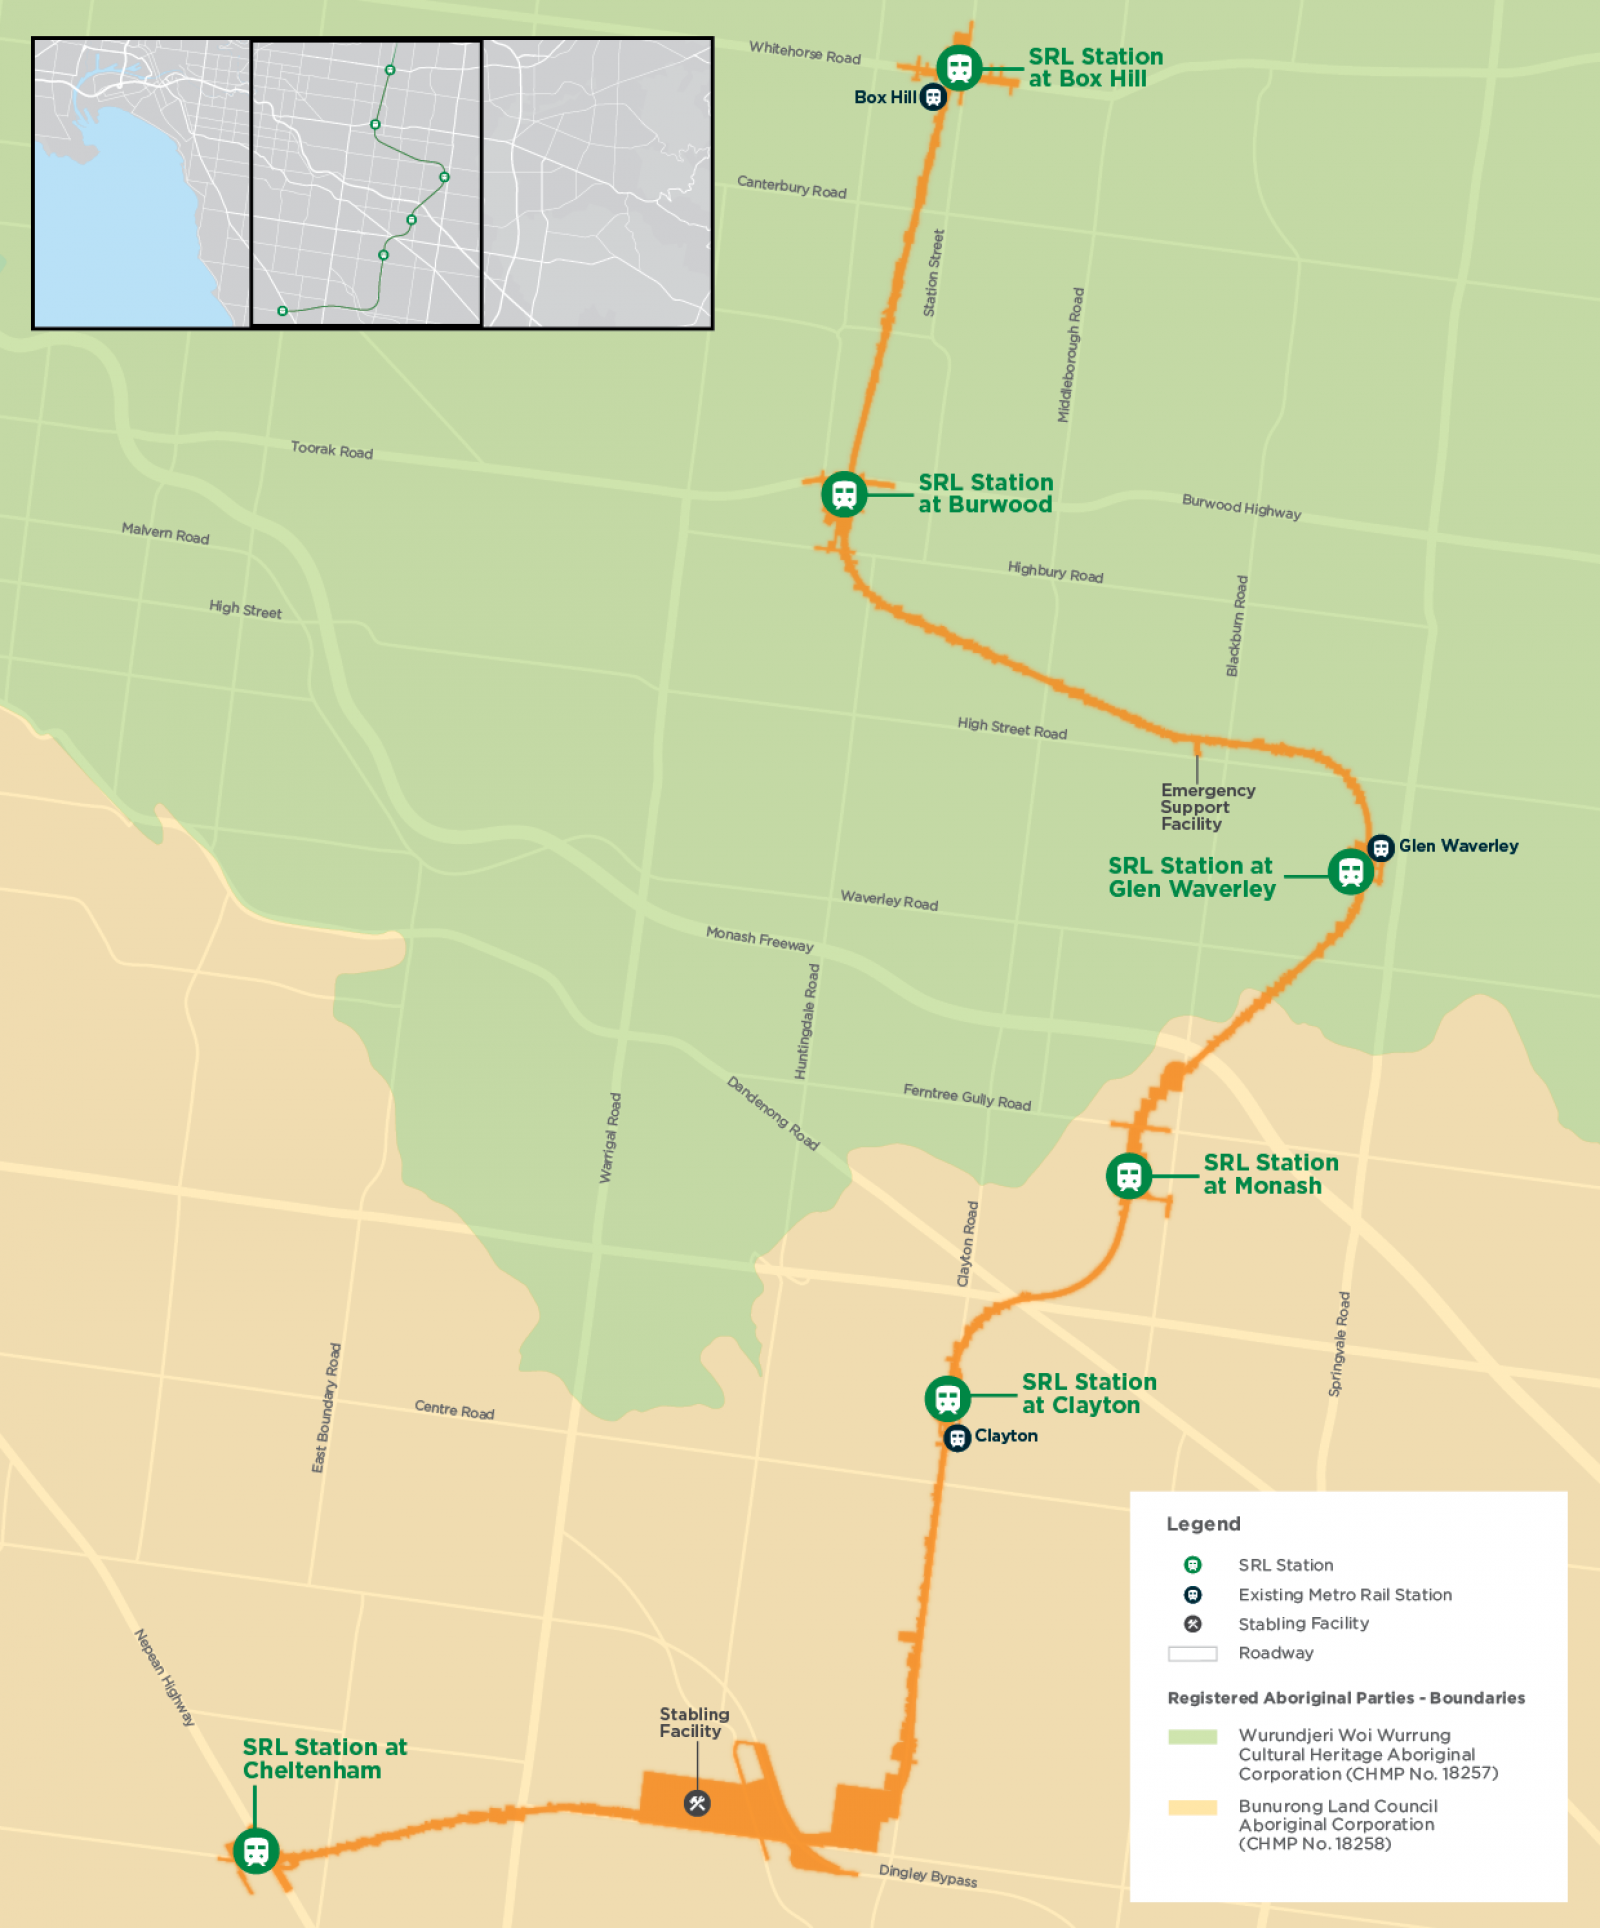 Map: SRL East alignment from Cheltenham to Box Hill and the Registered Aboriginal Parties Boundaries